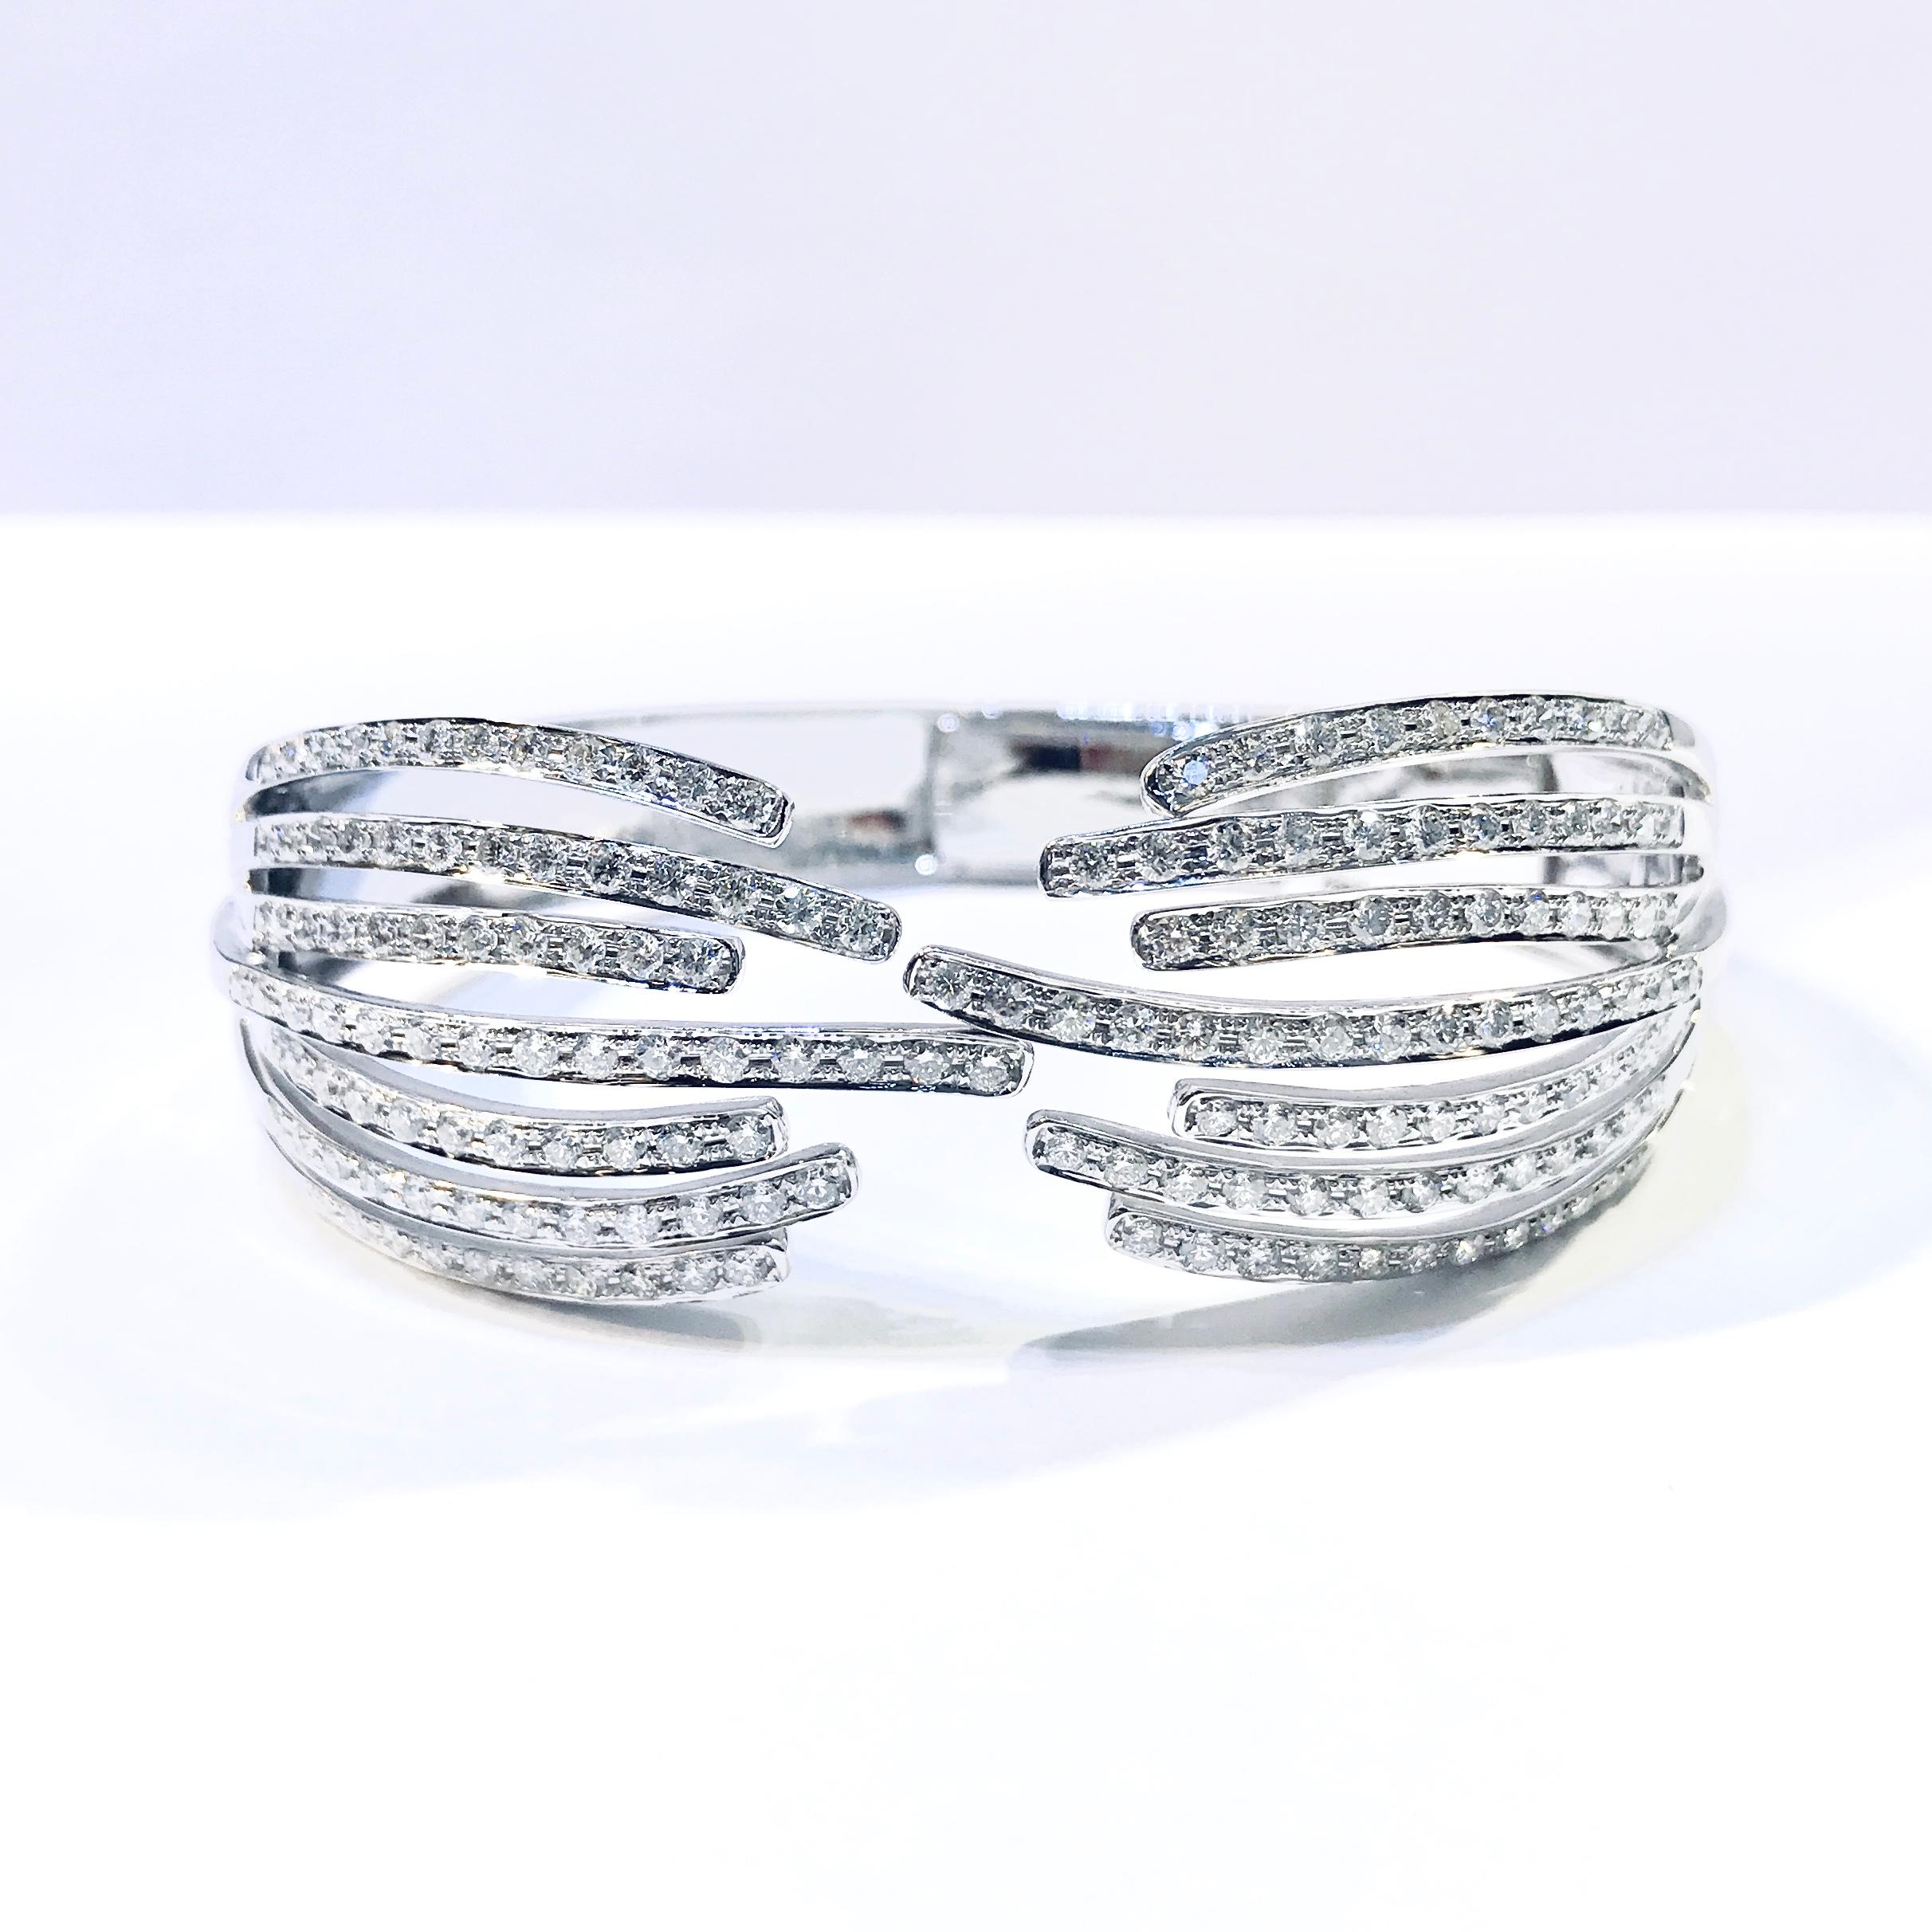 Veins collection- Chic and modern , with the concept of open bangle style, ideas came from veins . Easy to wear and easy to match for day and night look.

Height: 20.95 mm / Width: 59 mm / Depth: 2.53 mm 
Bangle Size - Width: 57 mm
18 Karat White